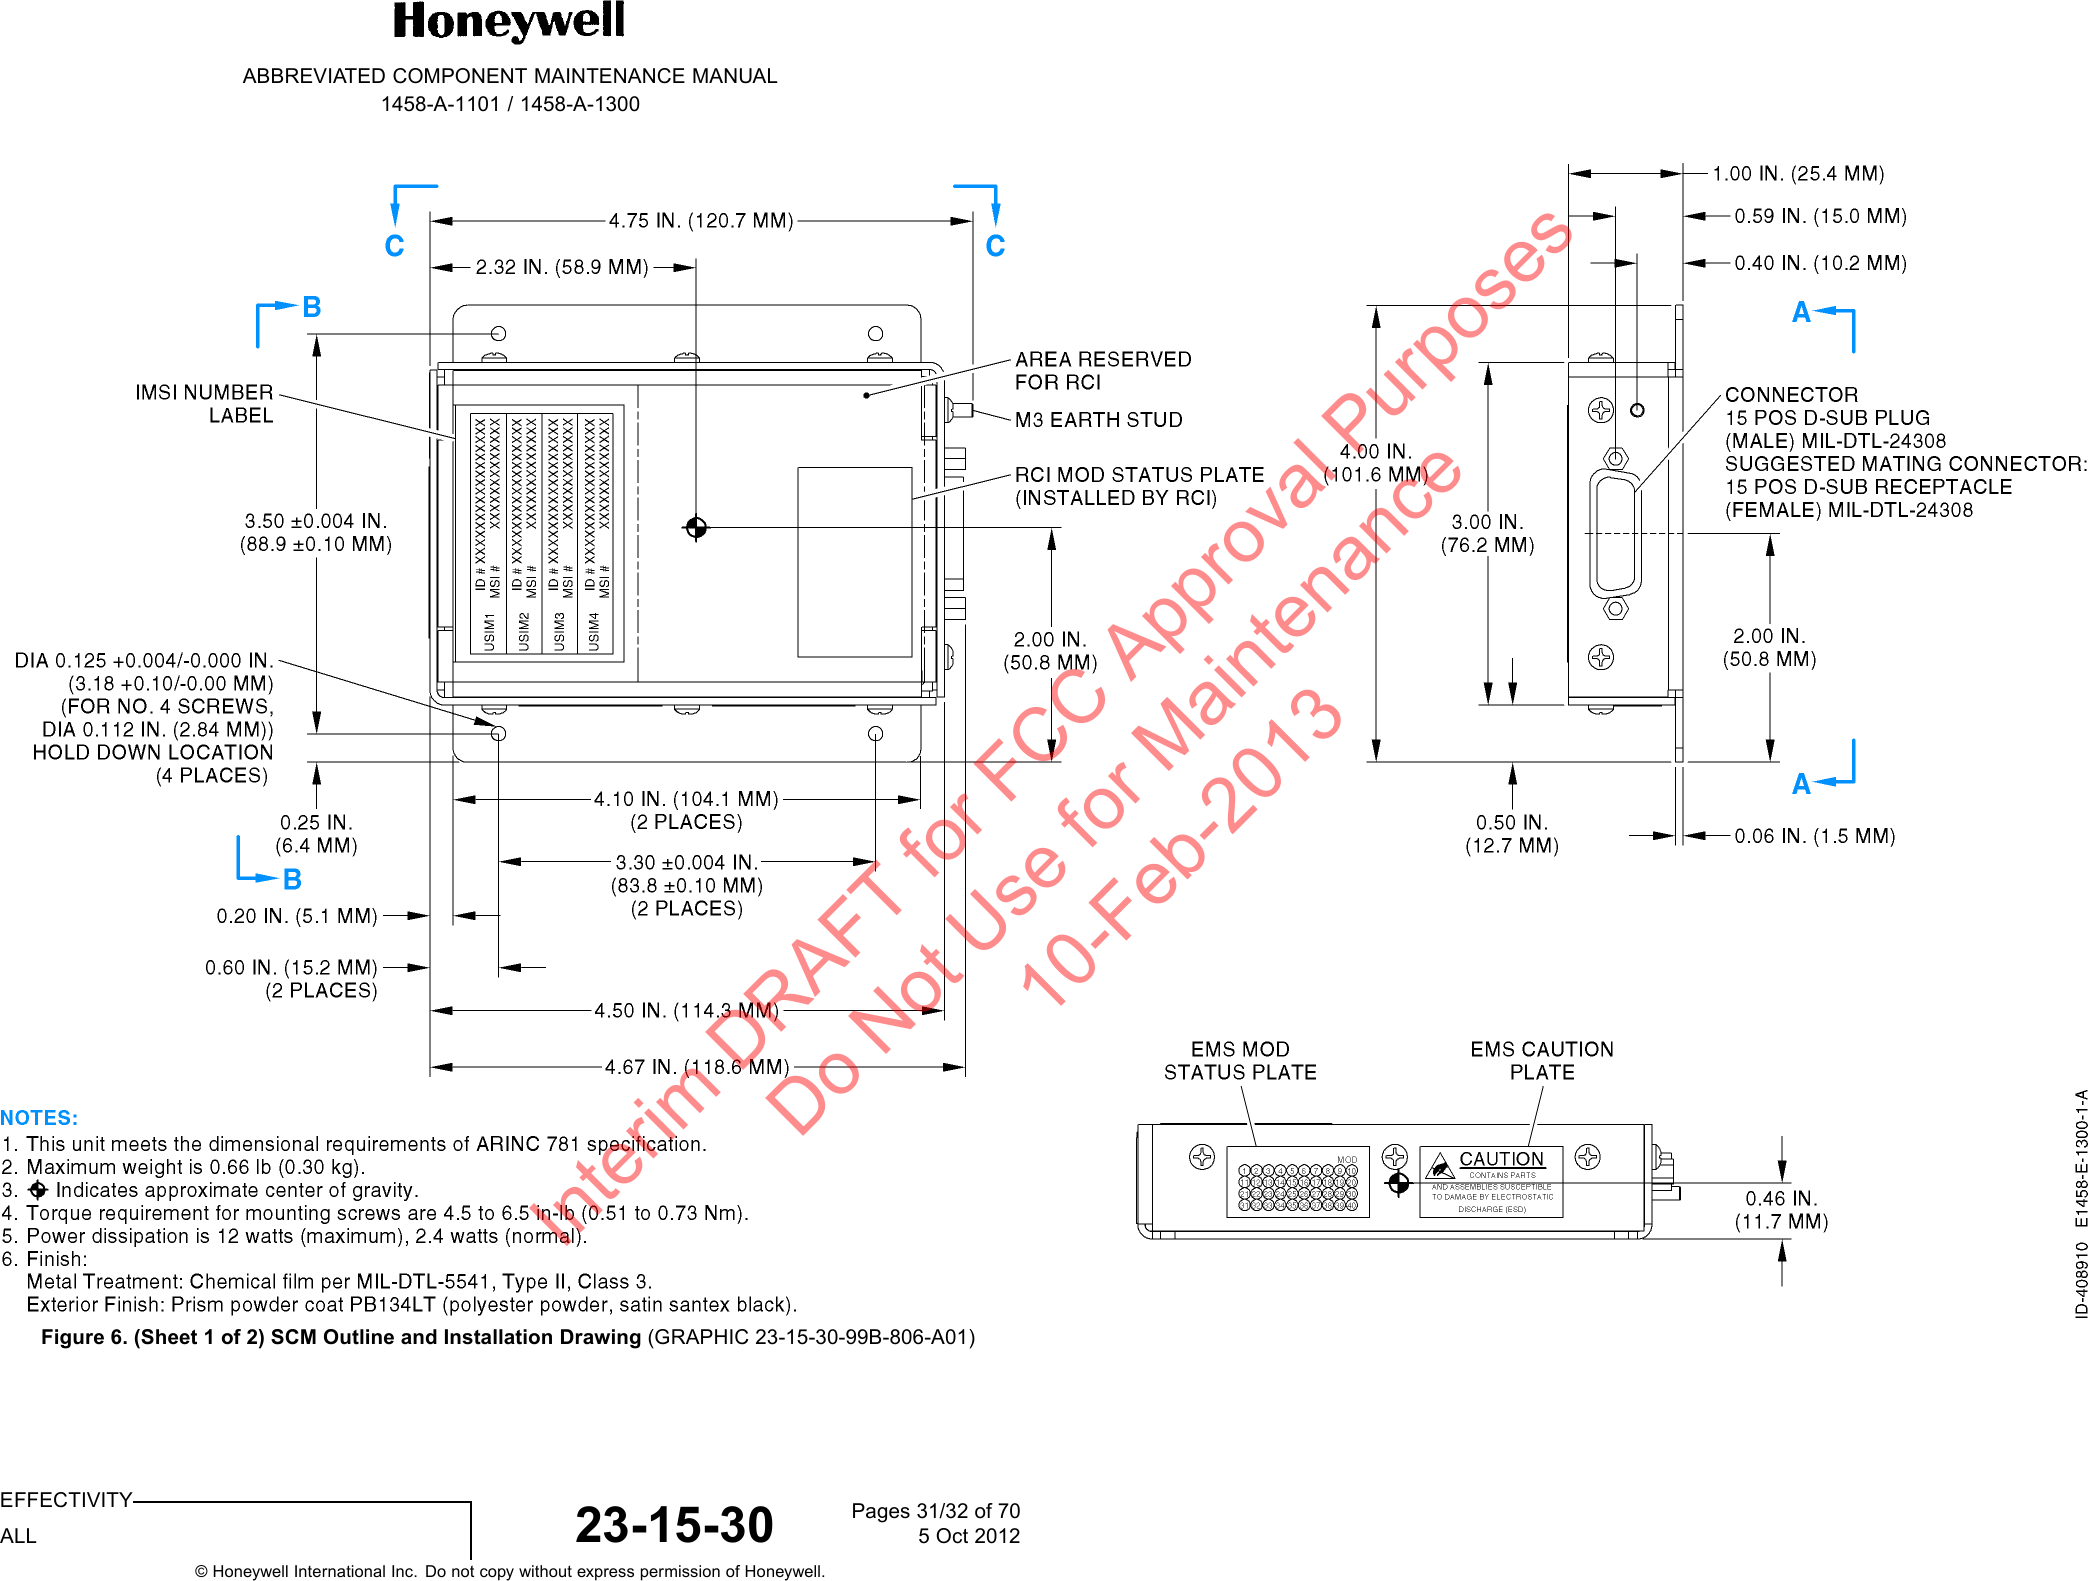 ABBREVIATED COMPONENT MAINTENANCE MANUAL1458-A-1101 / 1458-A-1300Figure 6. (Sheet 1 of 2) SCM Outline and Installation Drawing (GRAPHIC 23-15-30-99B-806-A01)EFFECTIVITYALL 23-15-30 Pages 31/32 of 705 Oct 2012© Honeywell International Inc. Do not copy without express permission of Honeywell.Interim DRAFT for FCC Approval Purposes Do Not Use for Maintenance 10-Feb-2013